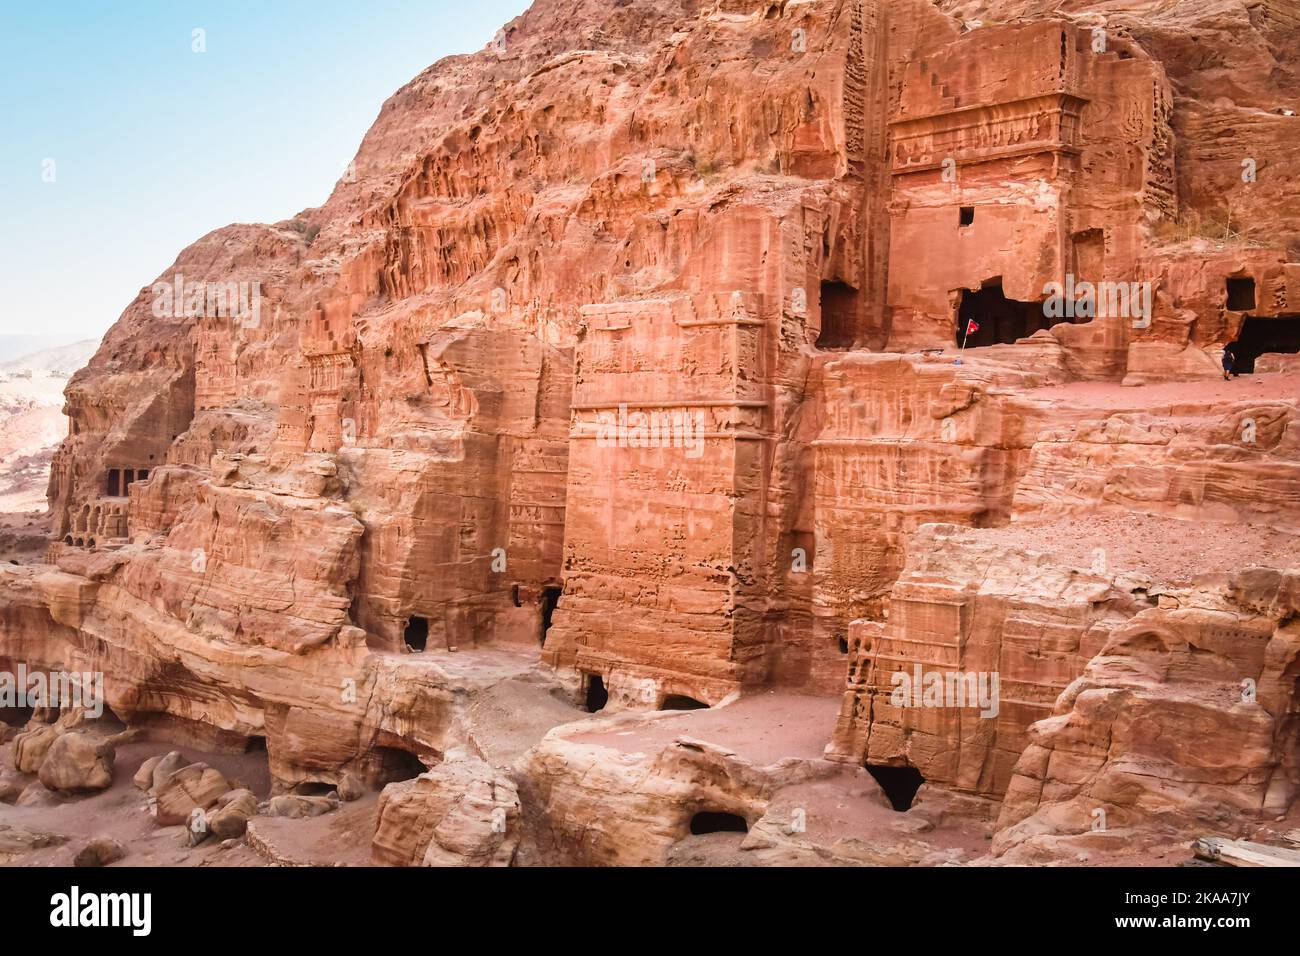 Royal tombs structures in ancient city of Petra, Jordan. It is know as the Loculi. Petra has led to its designation as UNESCO World Heritage Site Stock Photo